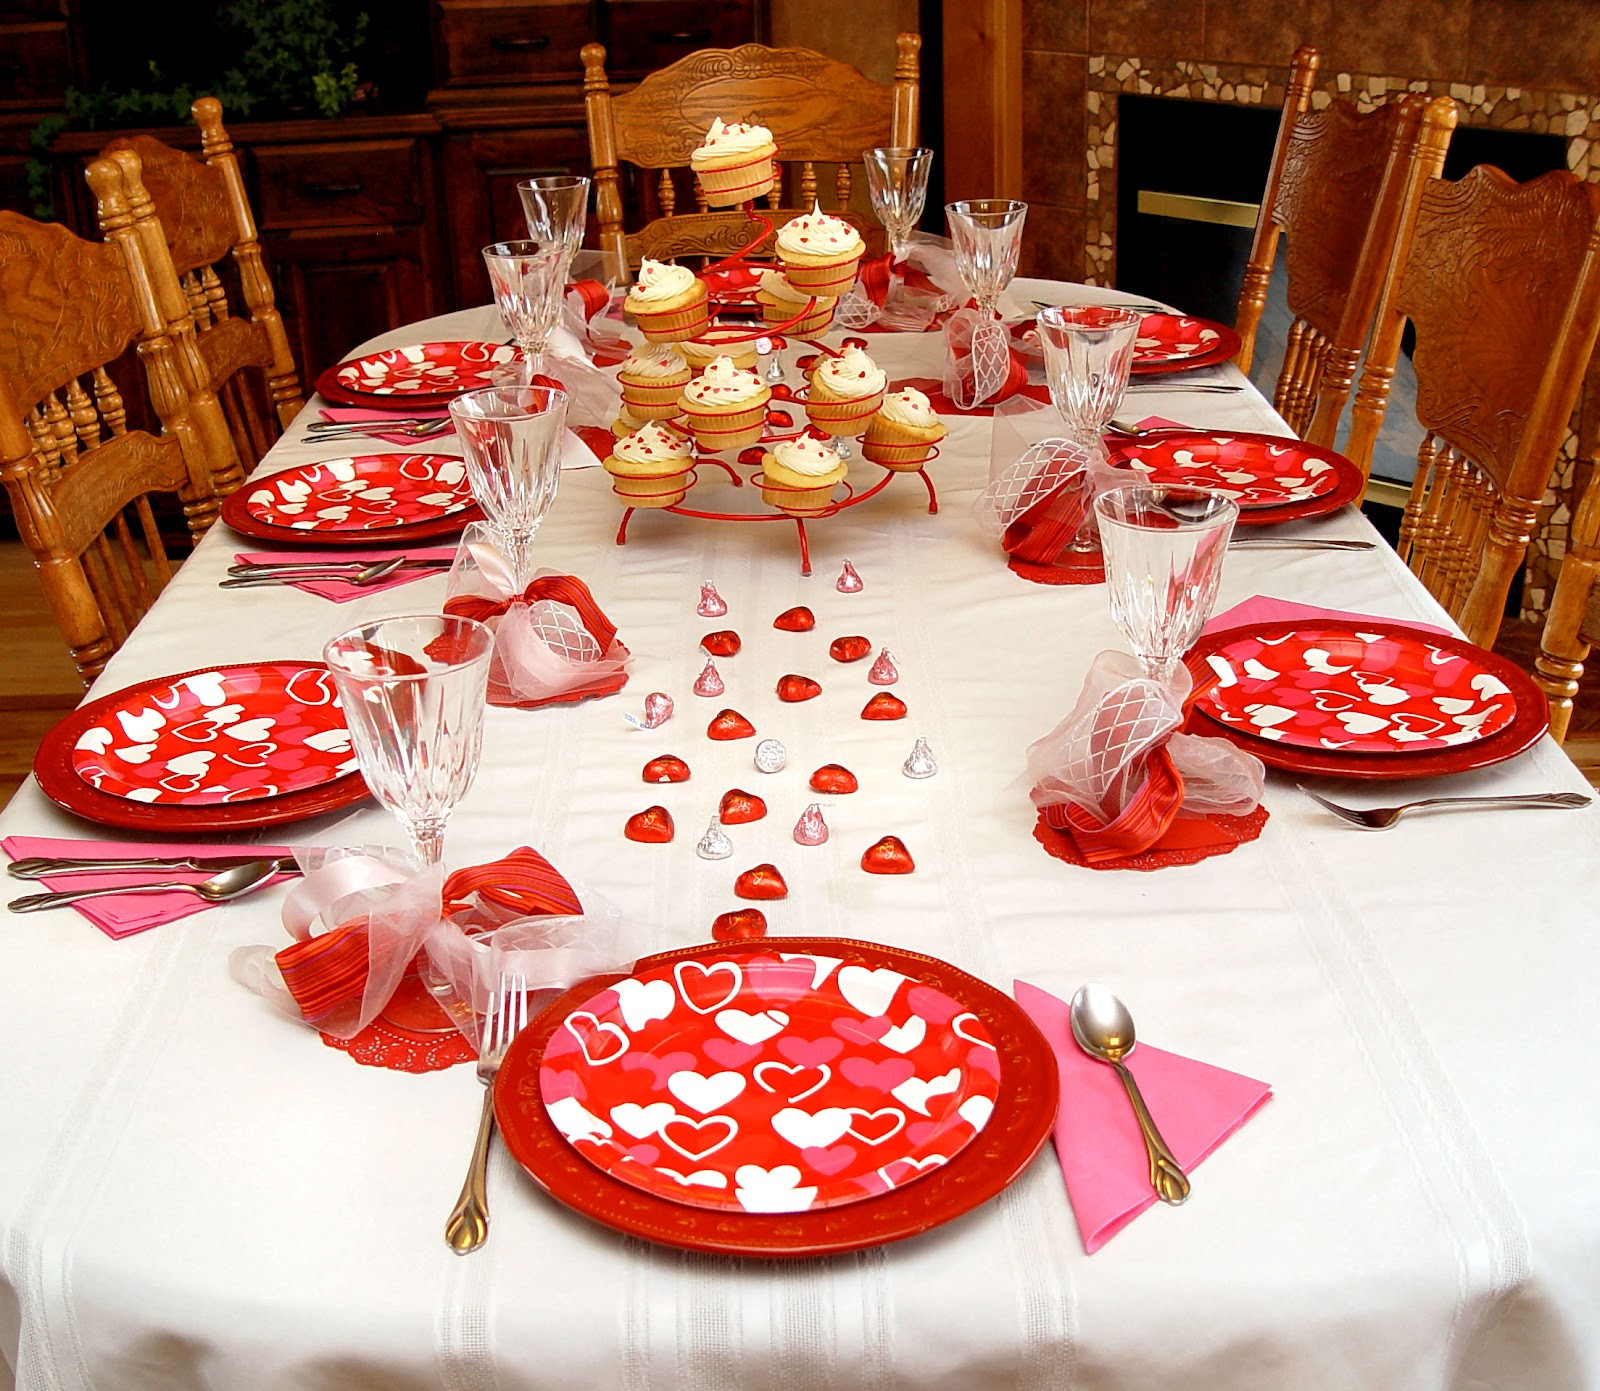 Valentines Day Dinner Party Ideas
 Family Valentines Dinner Idea and How To Make A Junk Bow